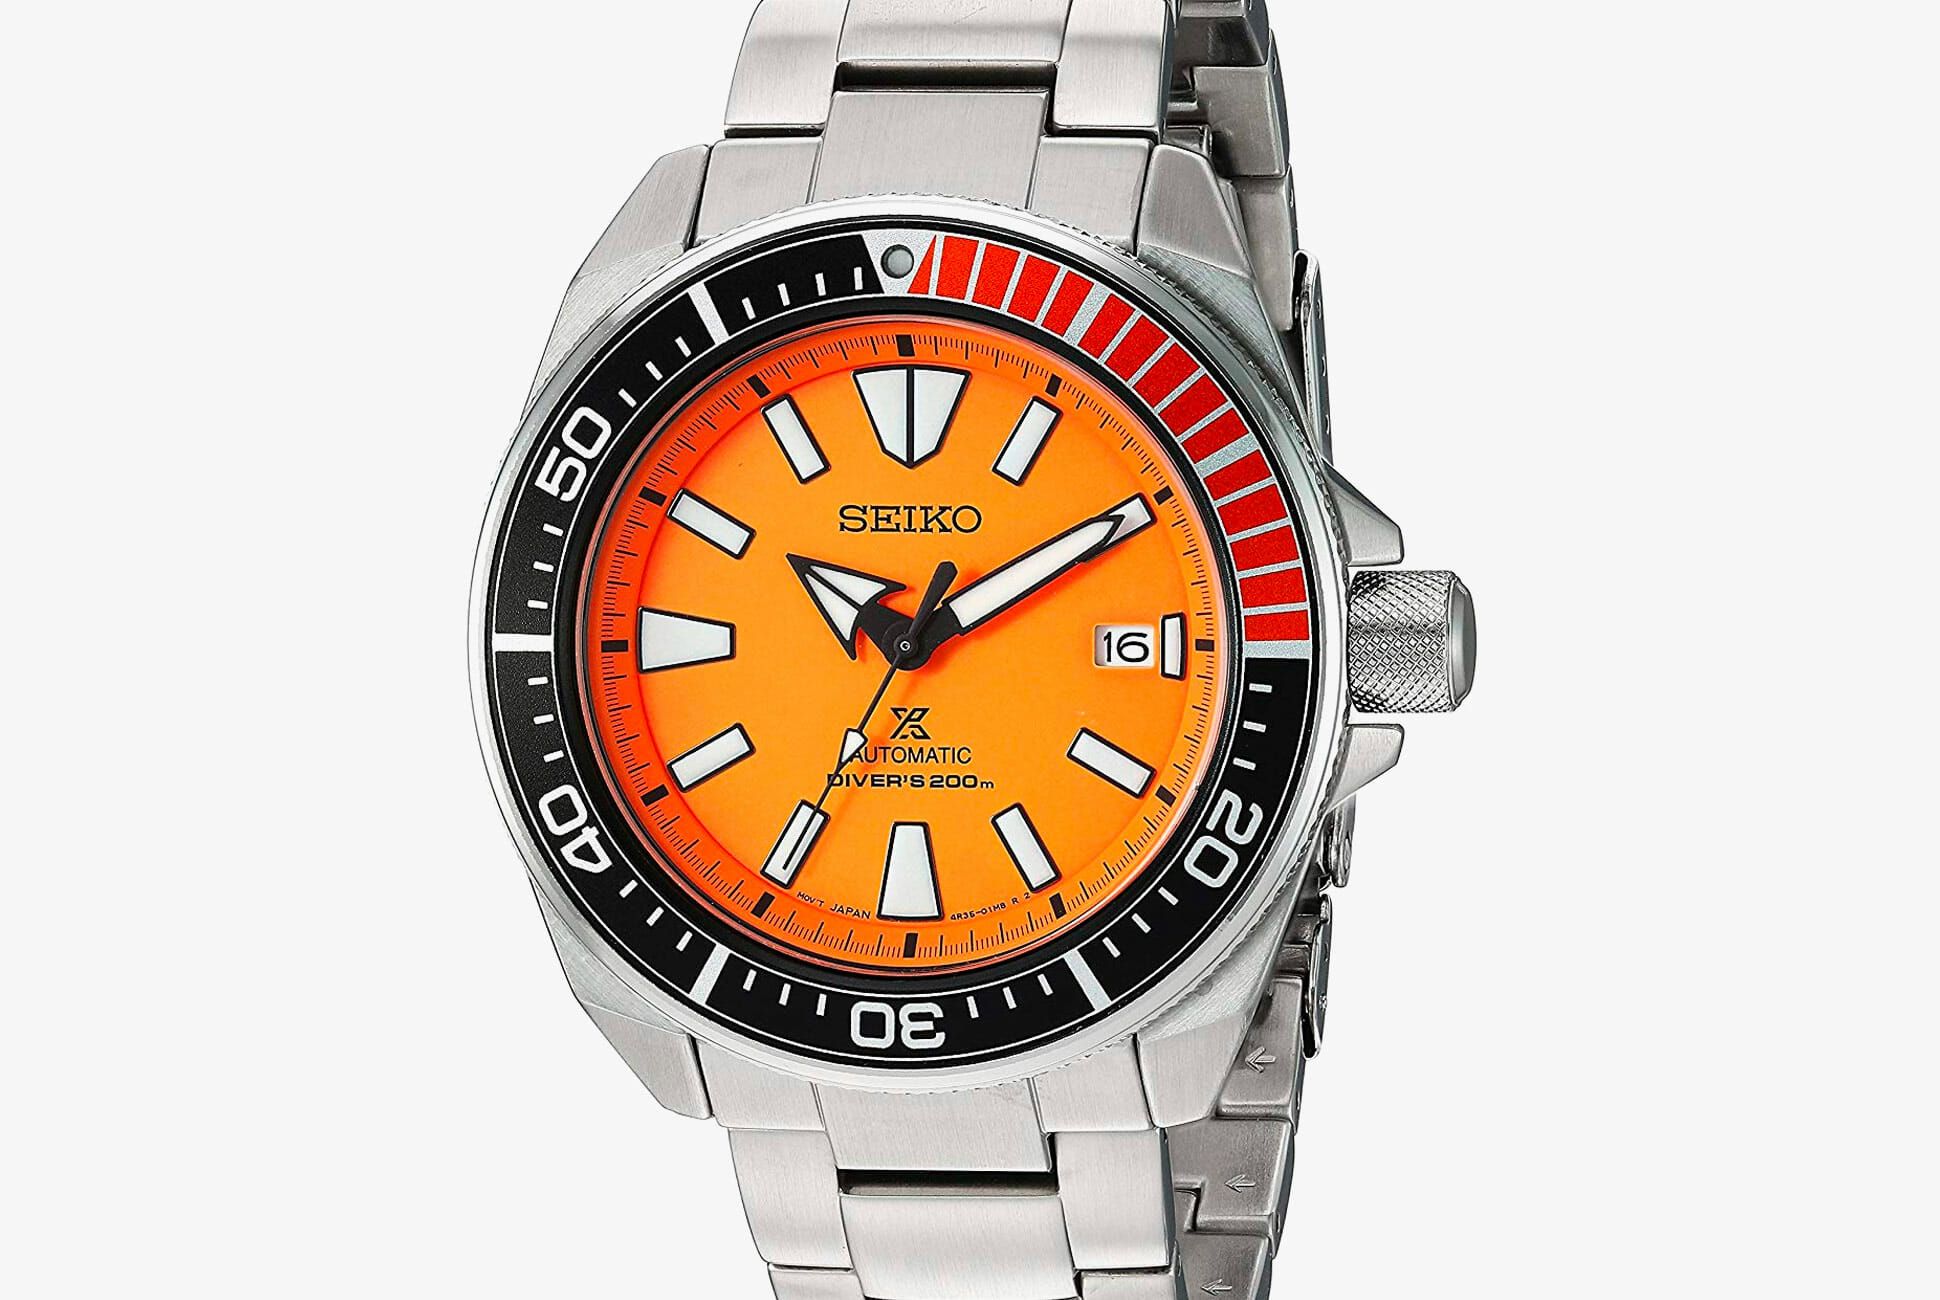 This Affordable Seiko Dive Watch Is 41% Off Today